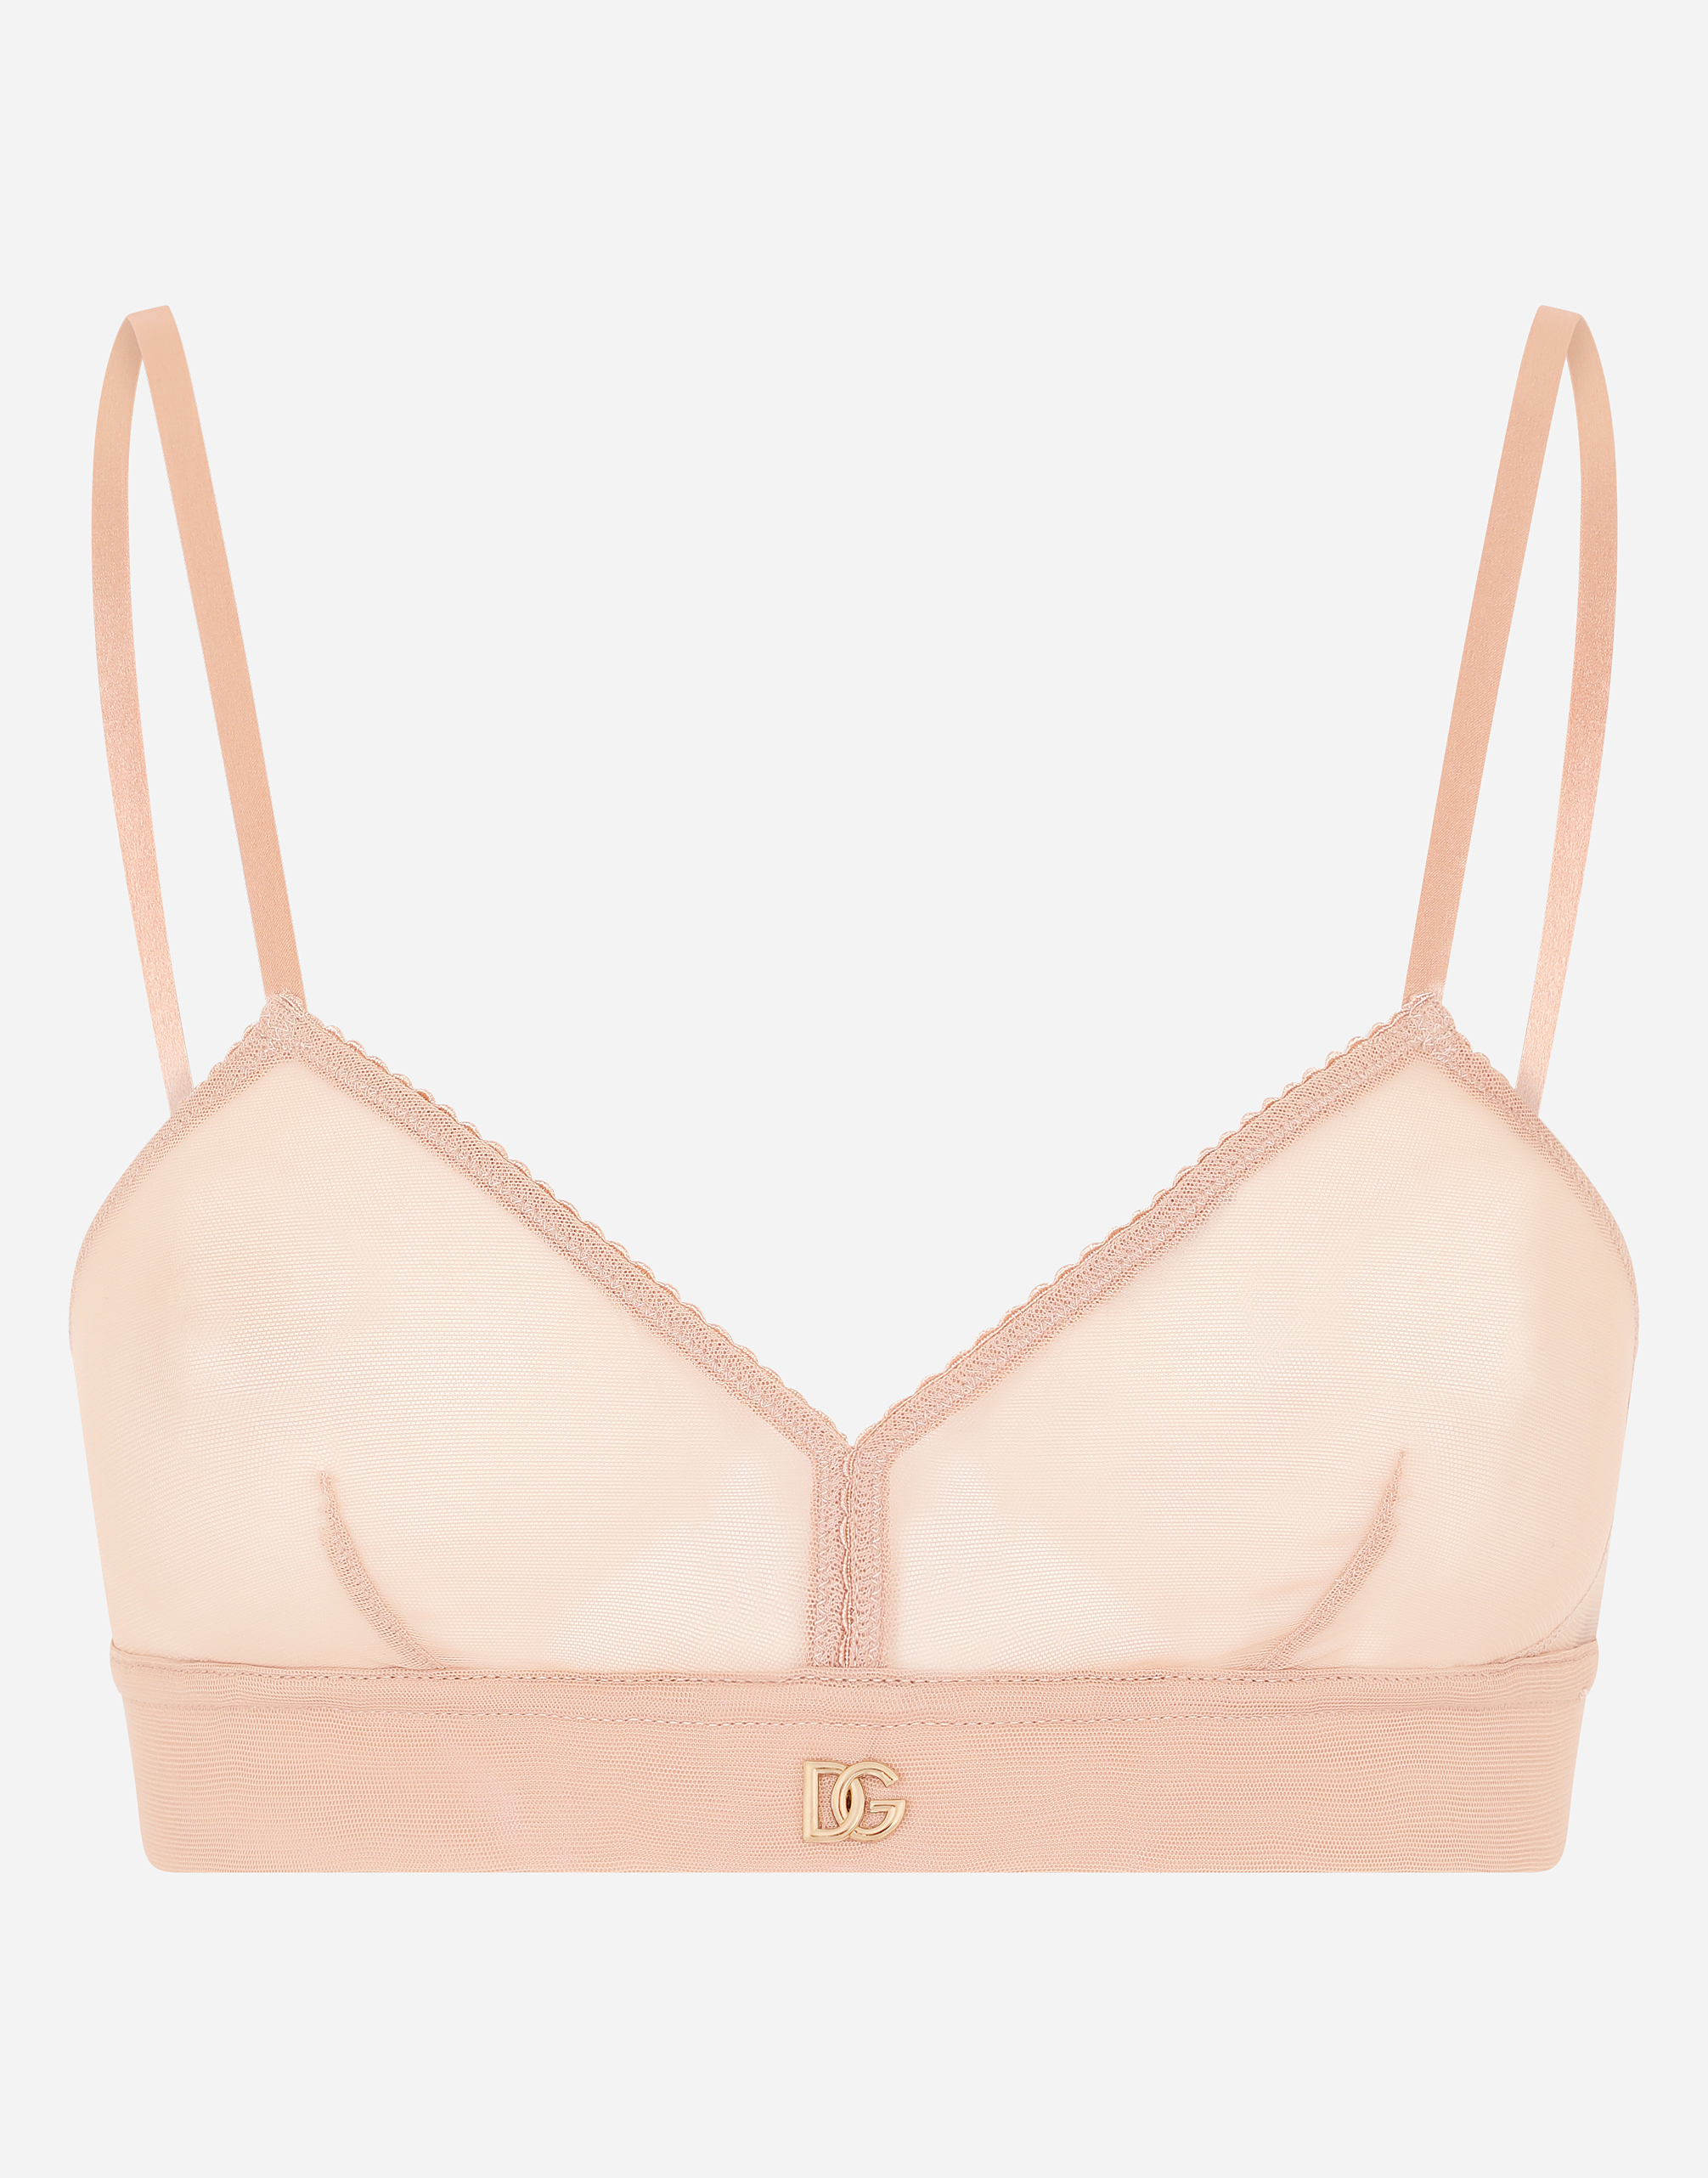 Tulle triangle bra with DG logo in Pale Pink